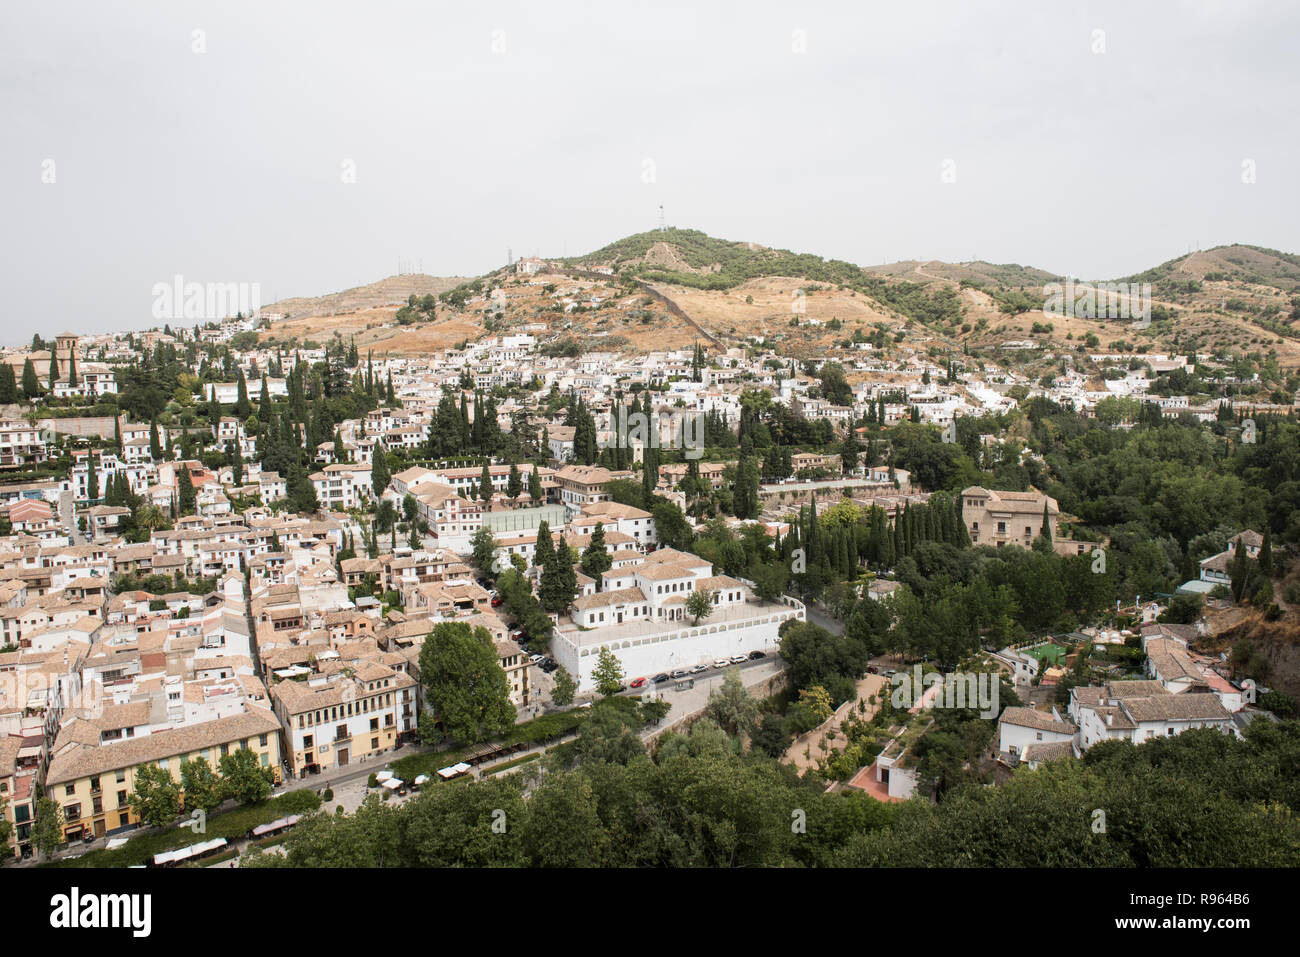 View of the city from the top of Palacio Nazares at Granadda, Spain. The bird's eye view of the city with lush greeneries look amazing. The day seems  Stock Photo